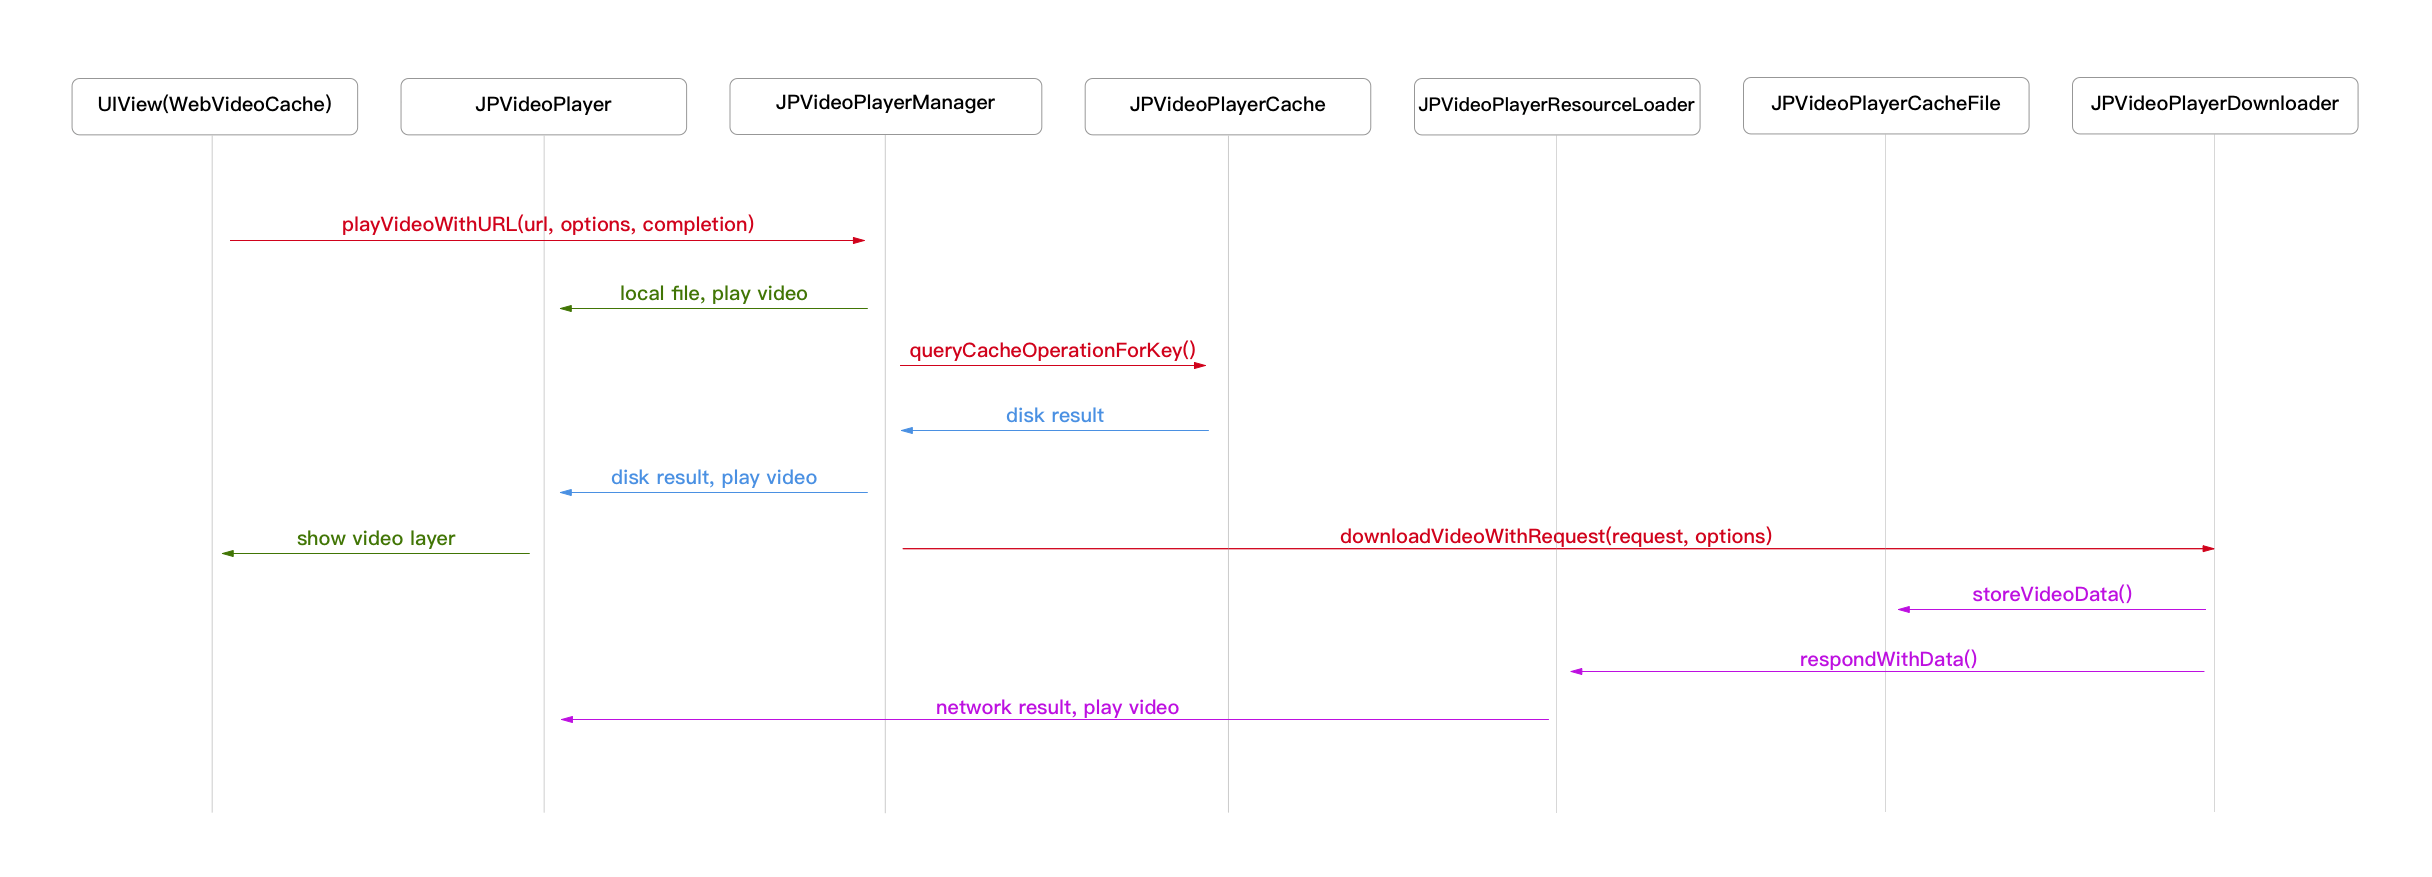 JPVideoPlayerSequenceDiagram.png